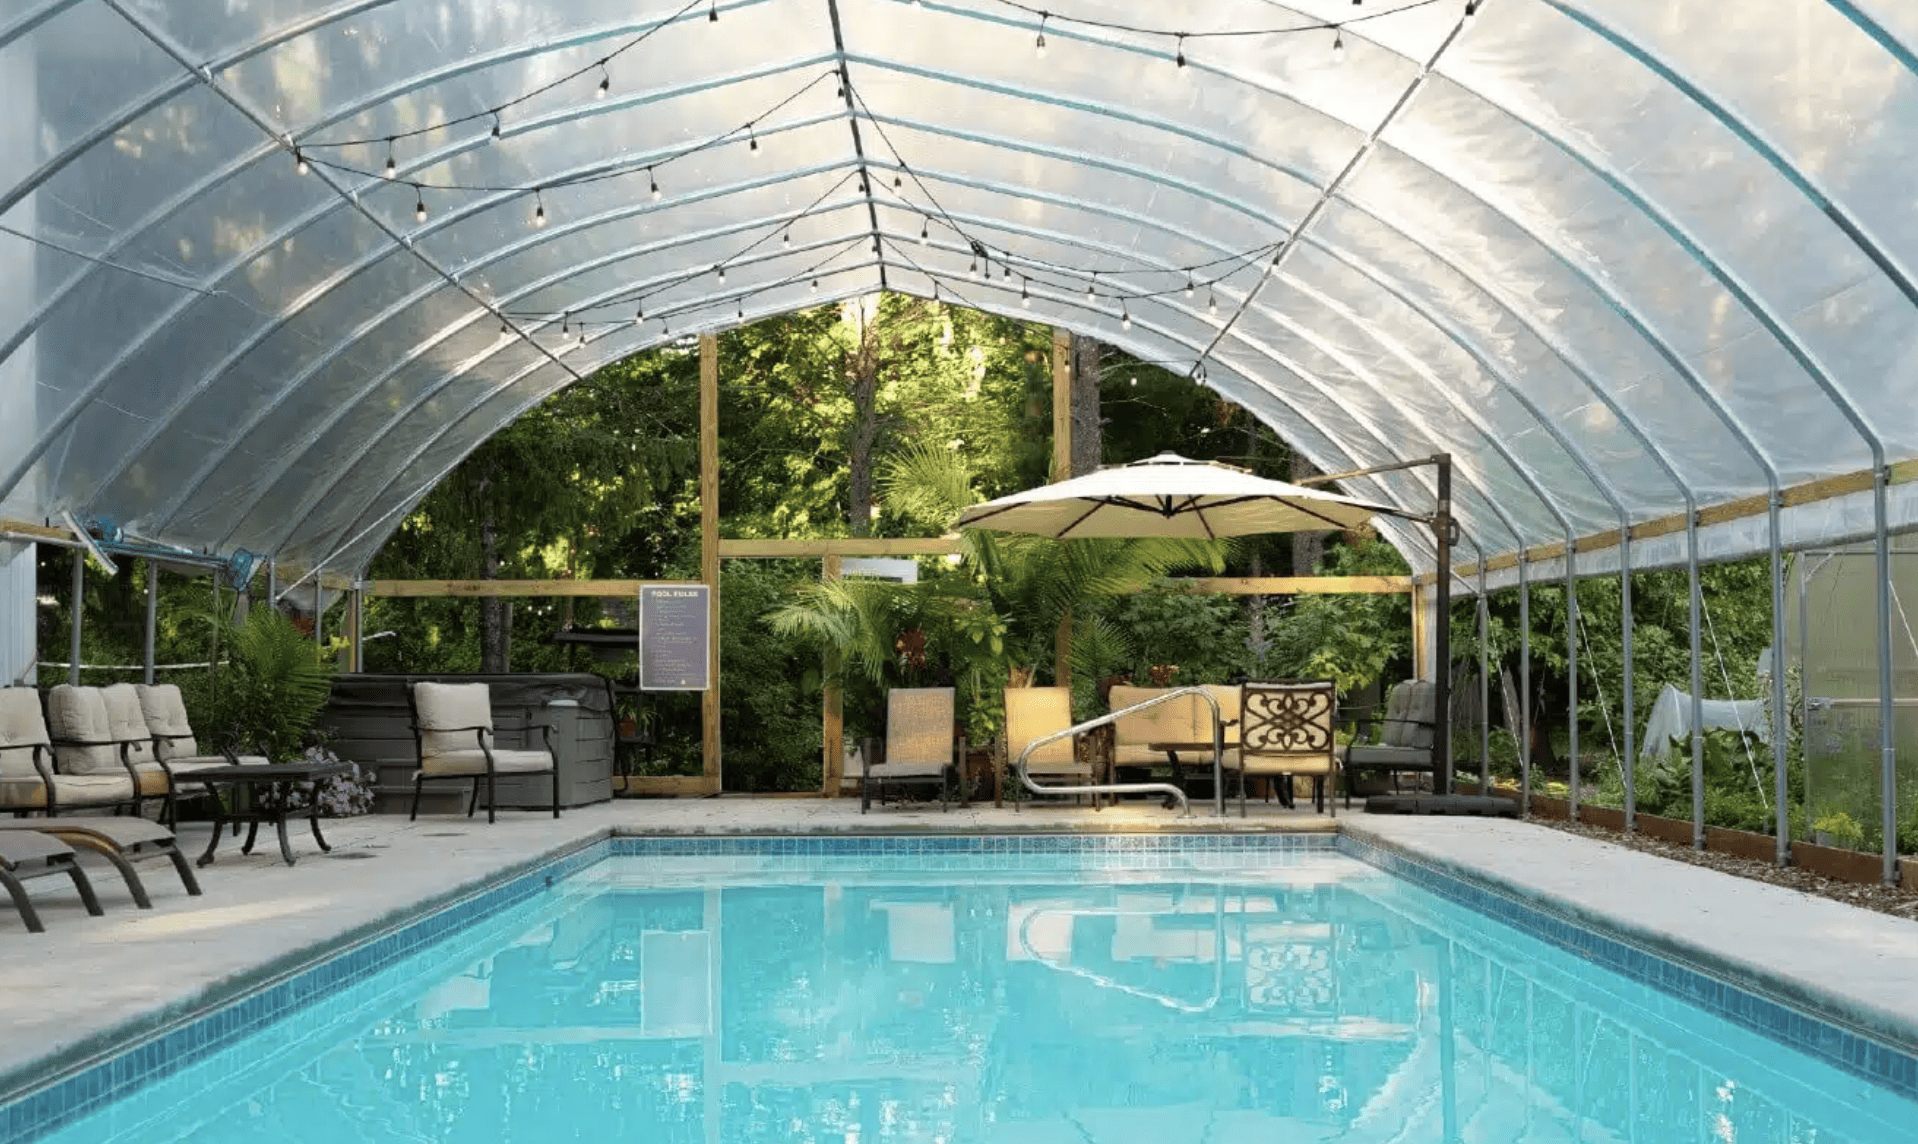 Pool with cover and umbrella seating at Goldberry Woods